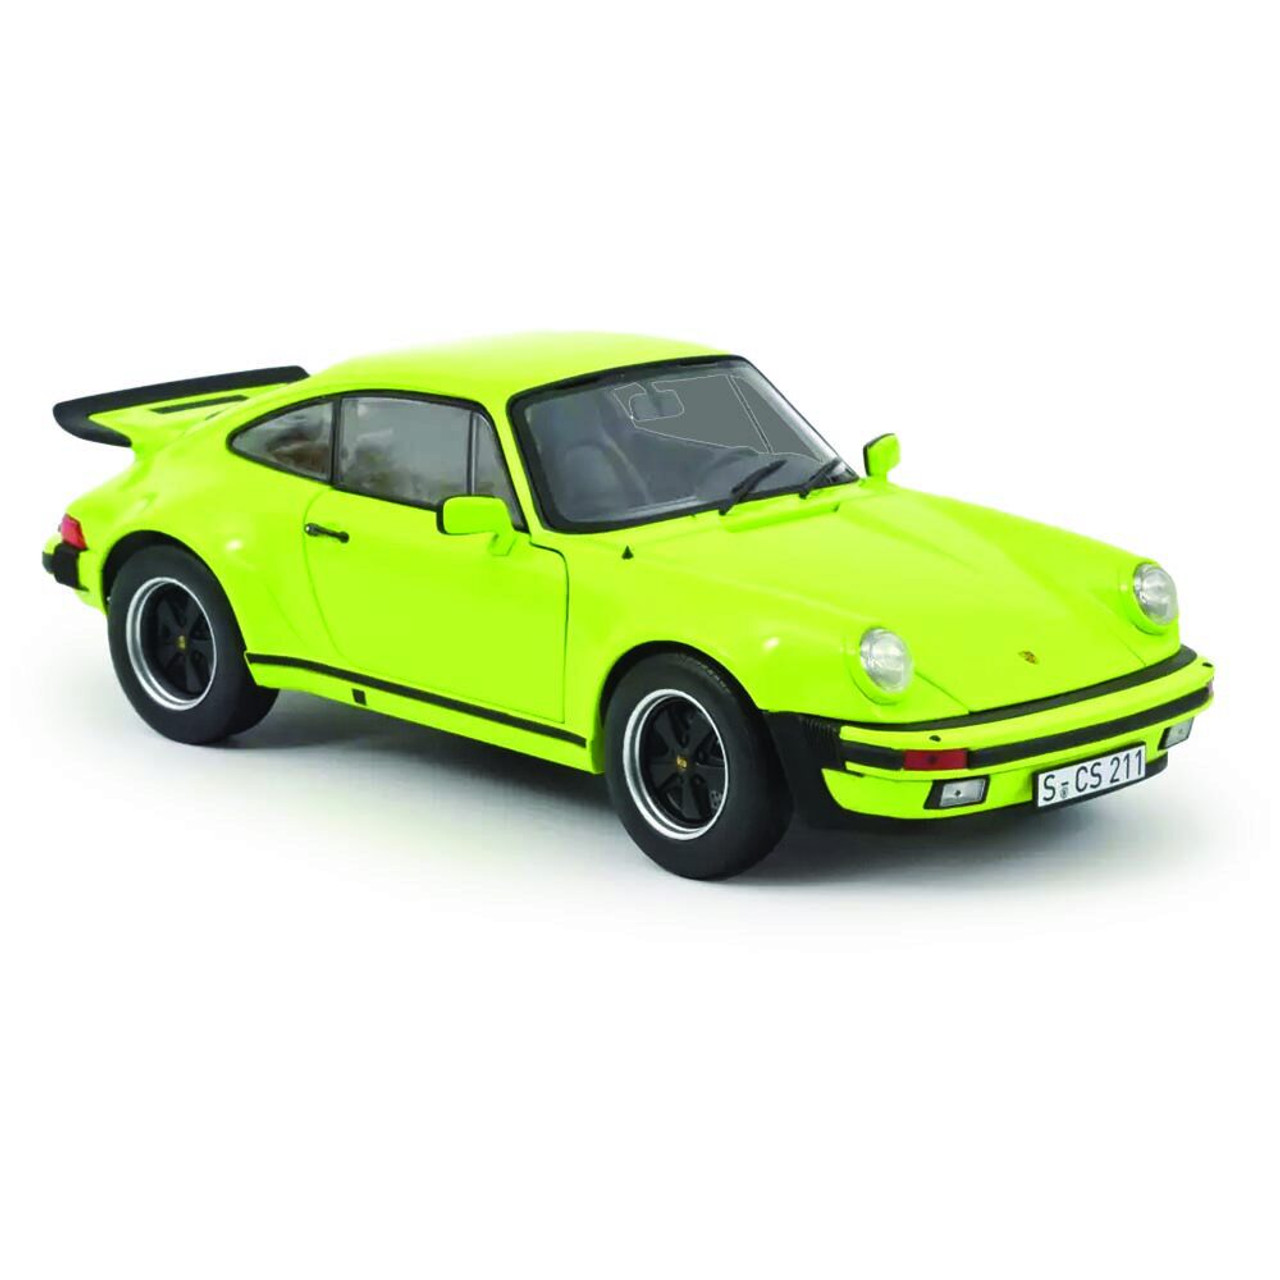 Geboorteplaats ondanks Lada 1976 Porsche 911 Turbo 3.0 - Light Green 1:18 Scale Diecast Model by Norev  | Fairfield Collectibles - The #1 Source For High Quality Diecast Scale  Model Cars